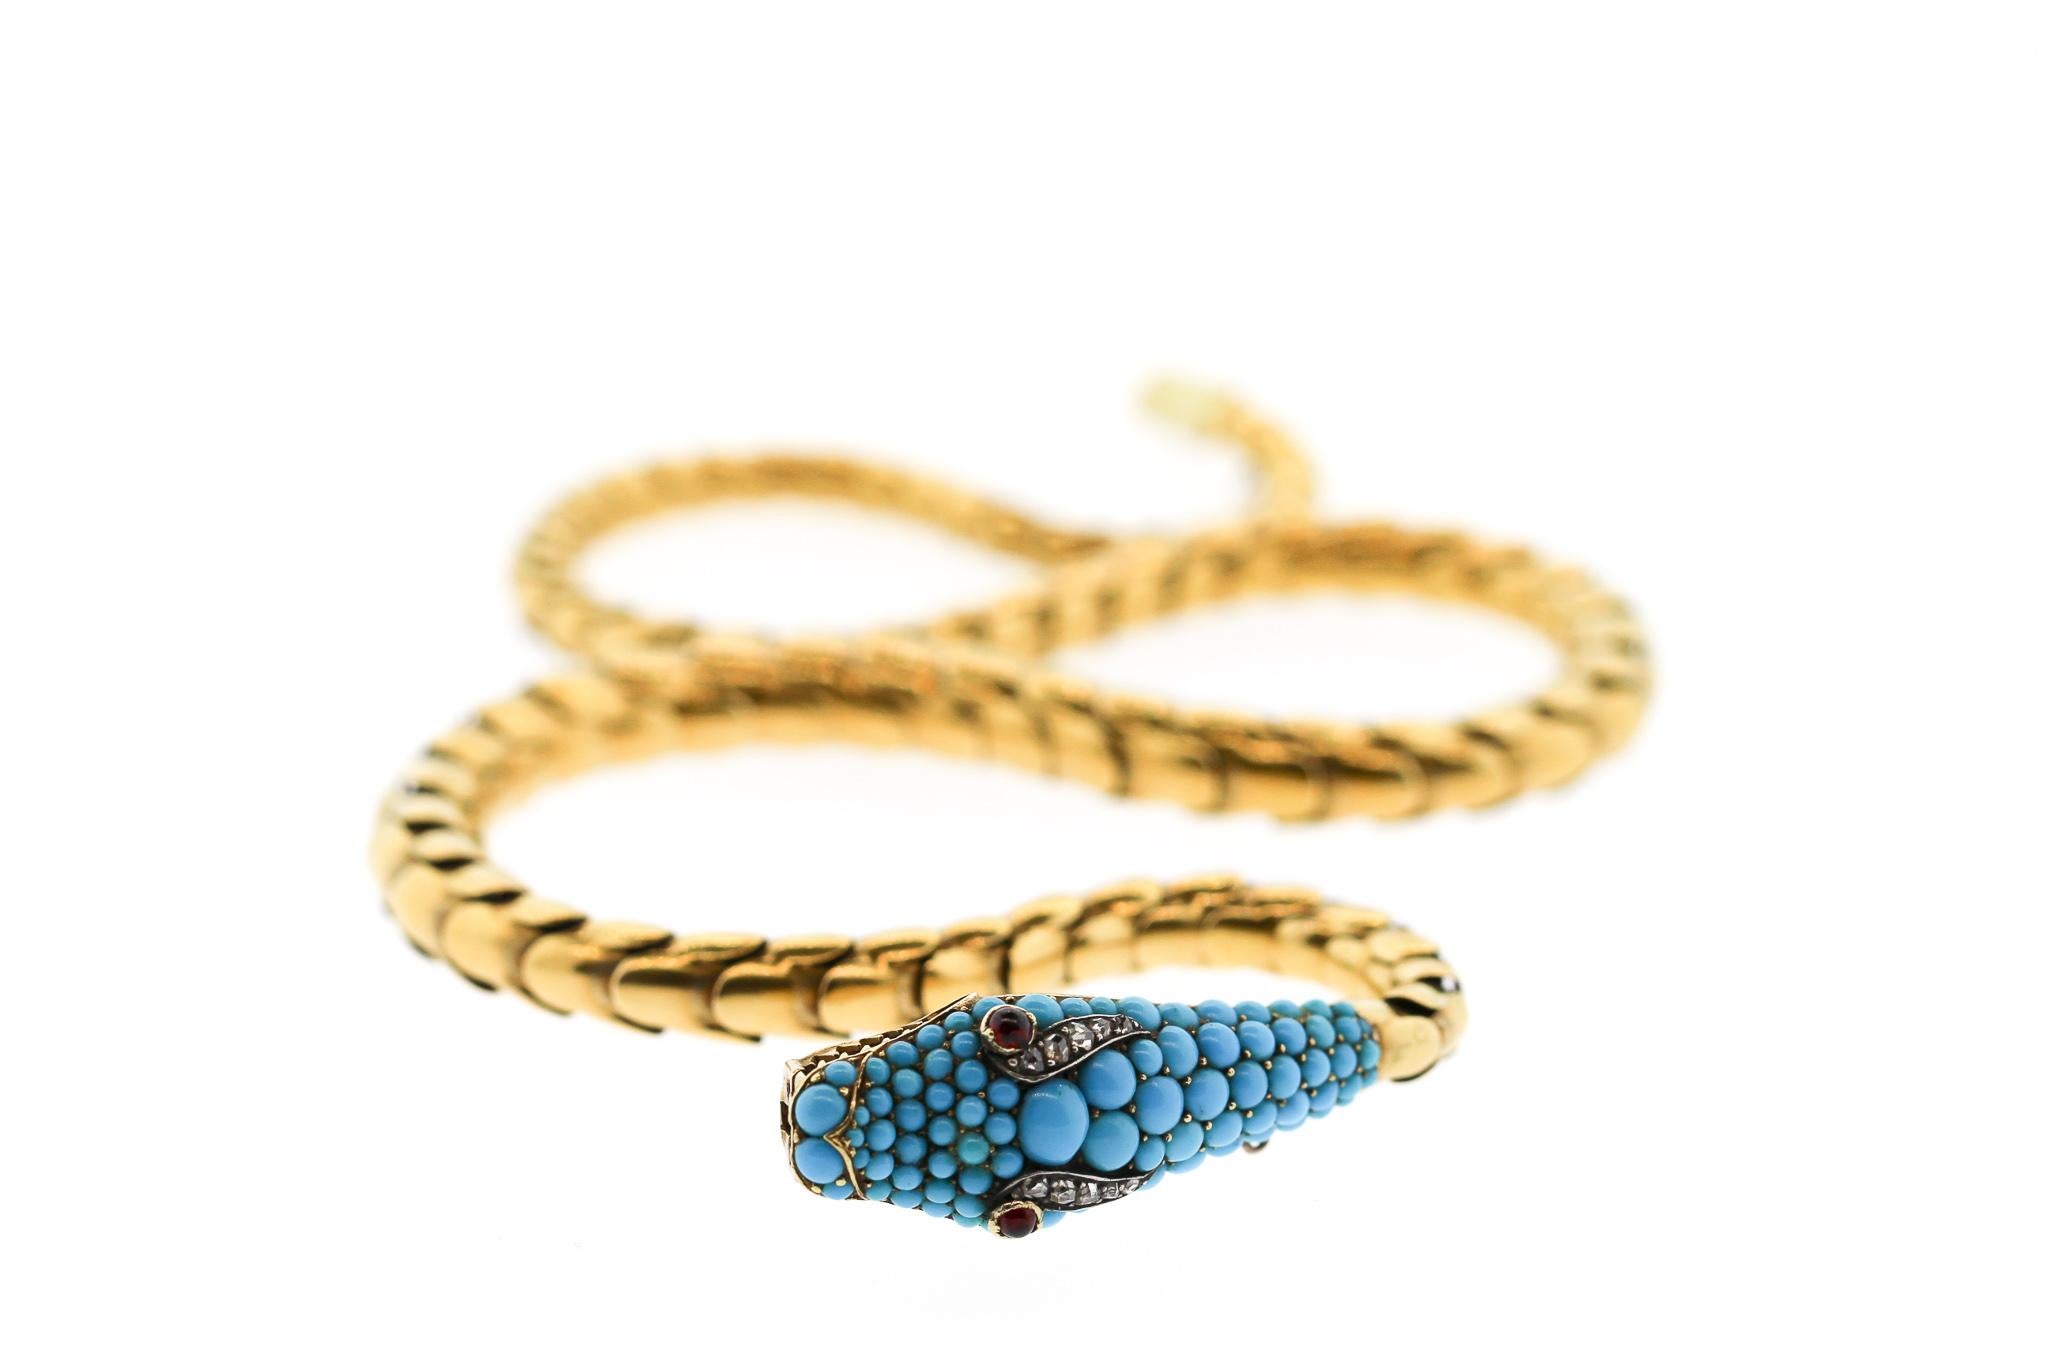 A Victorian gold snake necklace with a pave turquoise head biting its tail, circa 1880. The snake symbolizes everlasting love, rebirth and fidelity in the Victorian times. When Prince Albert gave Queen Victoria a snake ring, a craze for snake